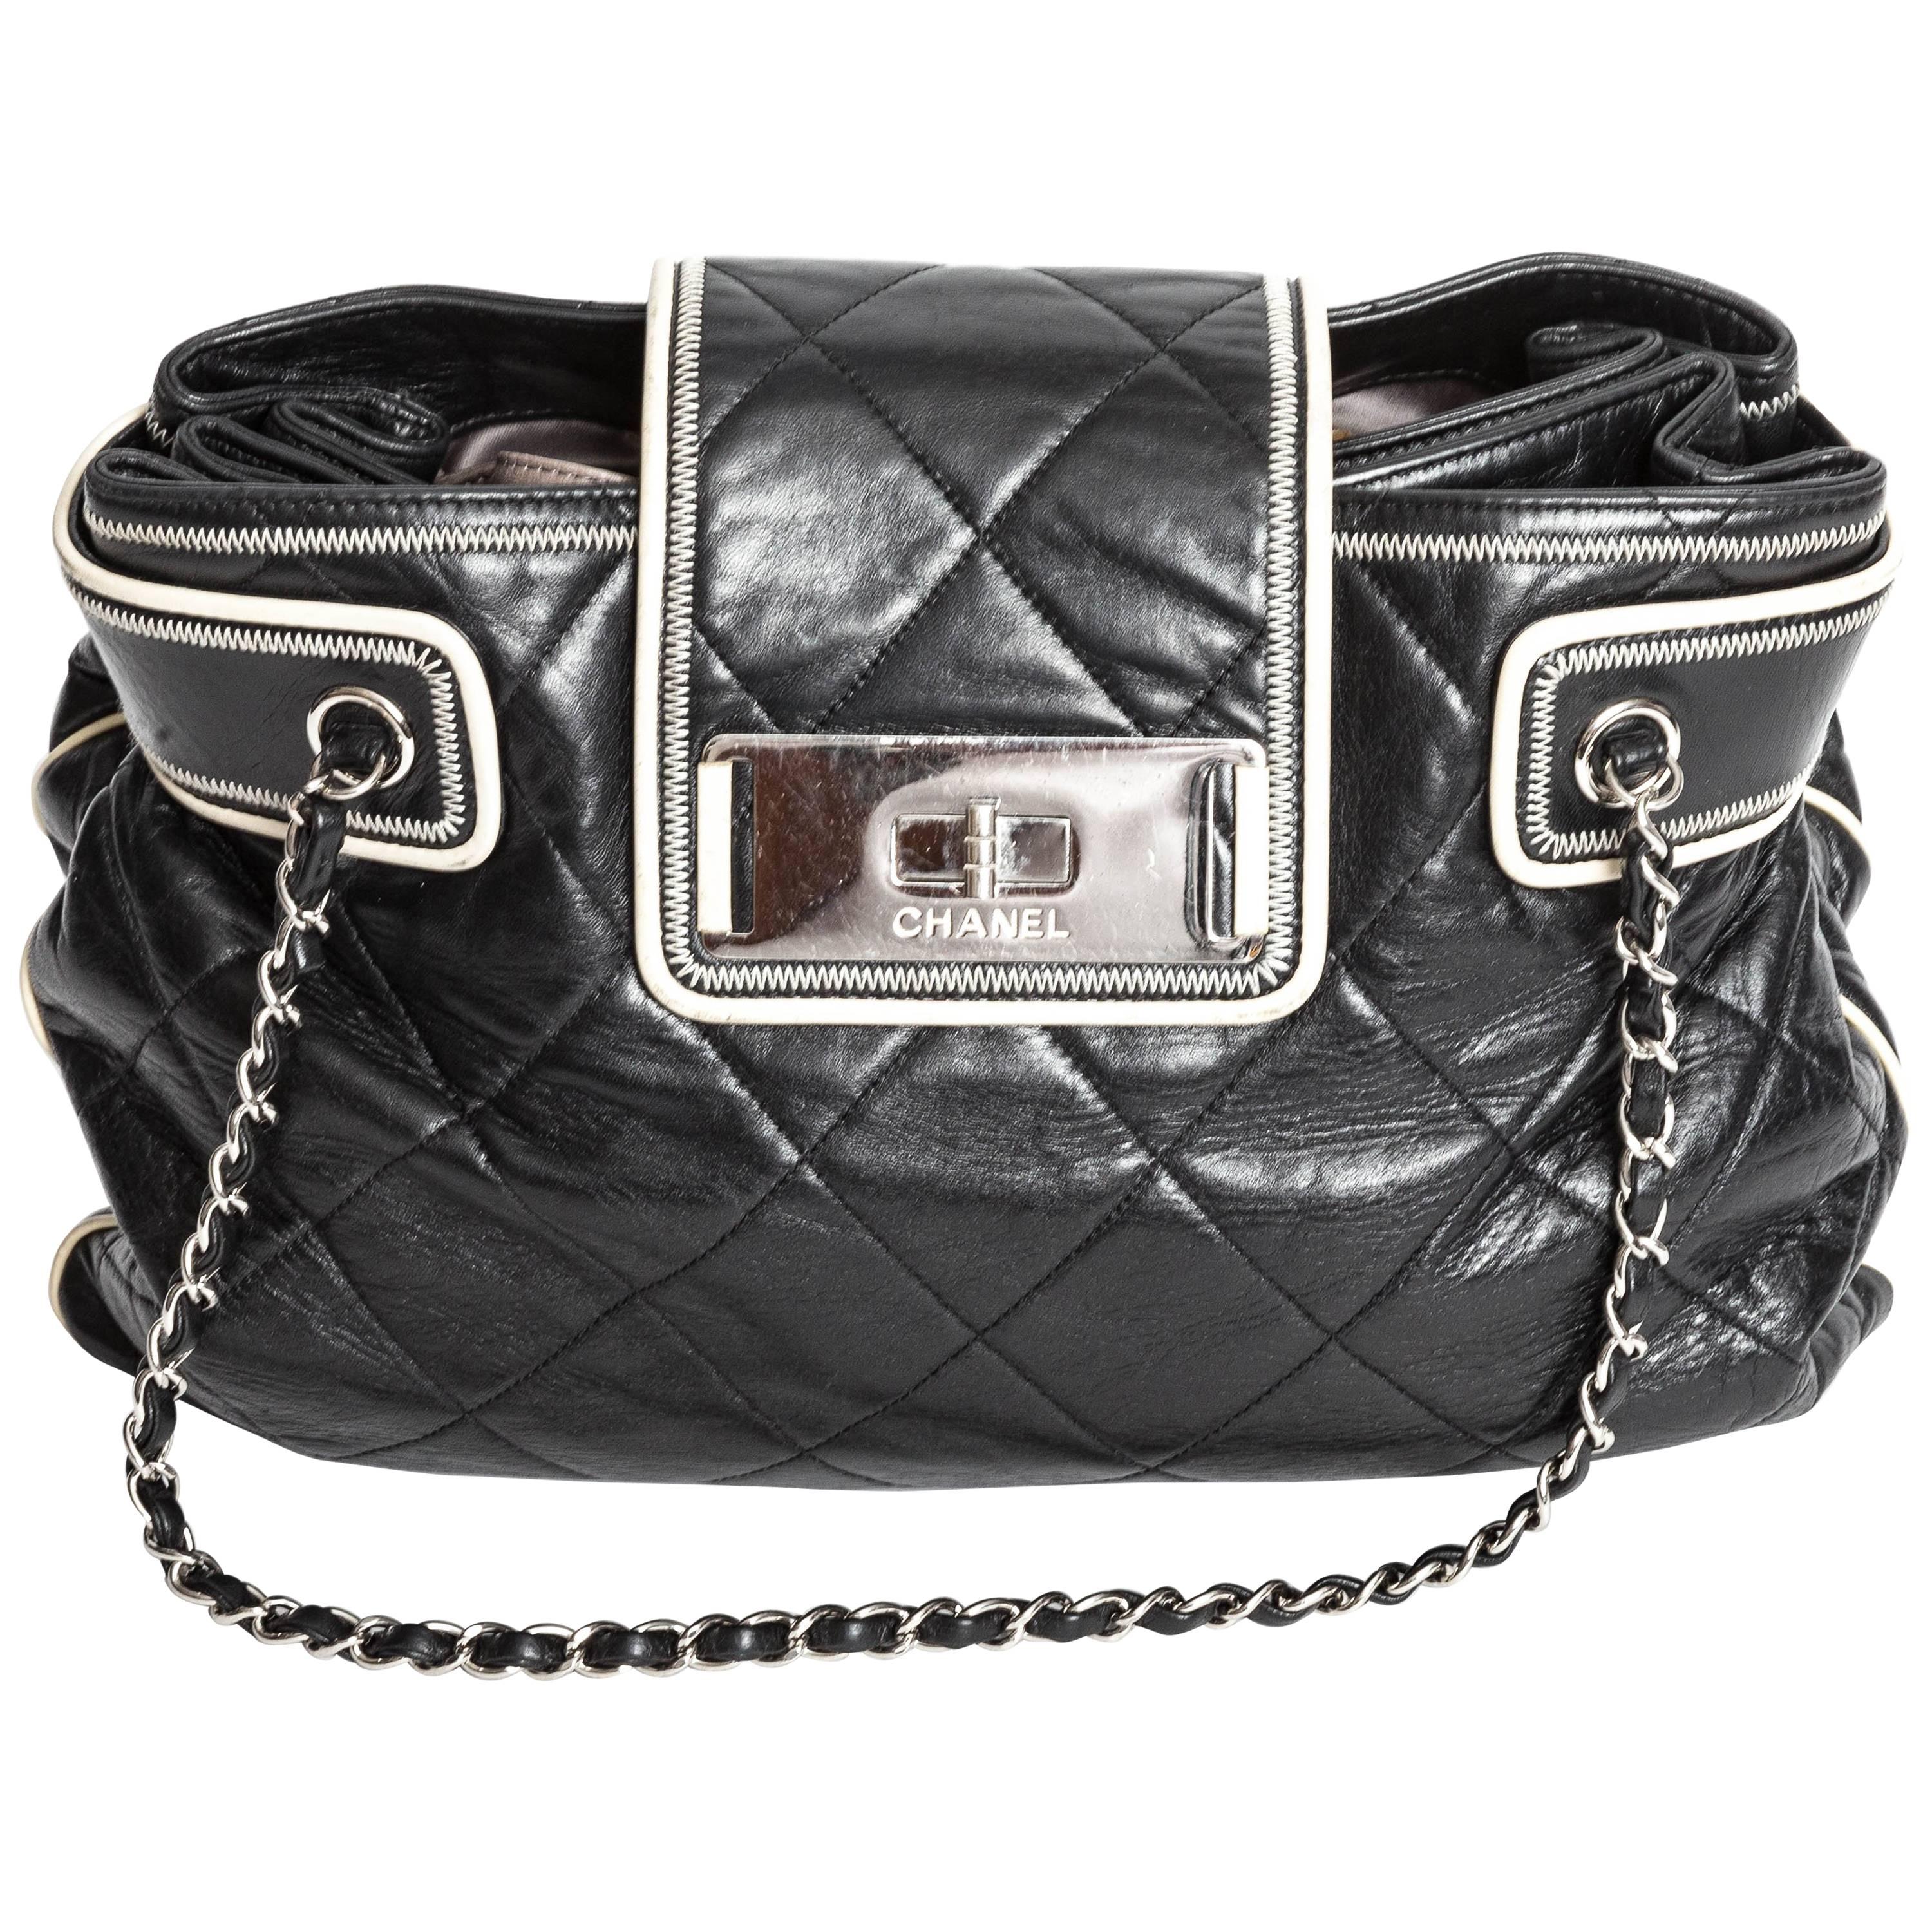 Chanel Black Leather Quilted Bag with Cream Leather Piping and Silver Hardware